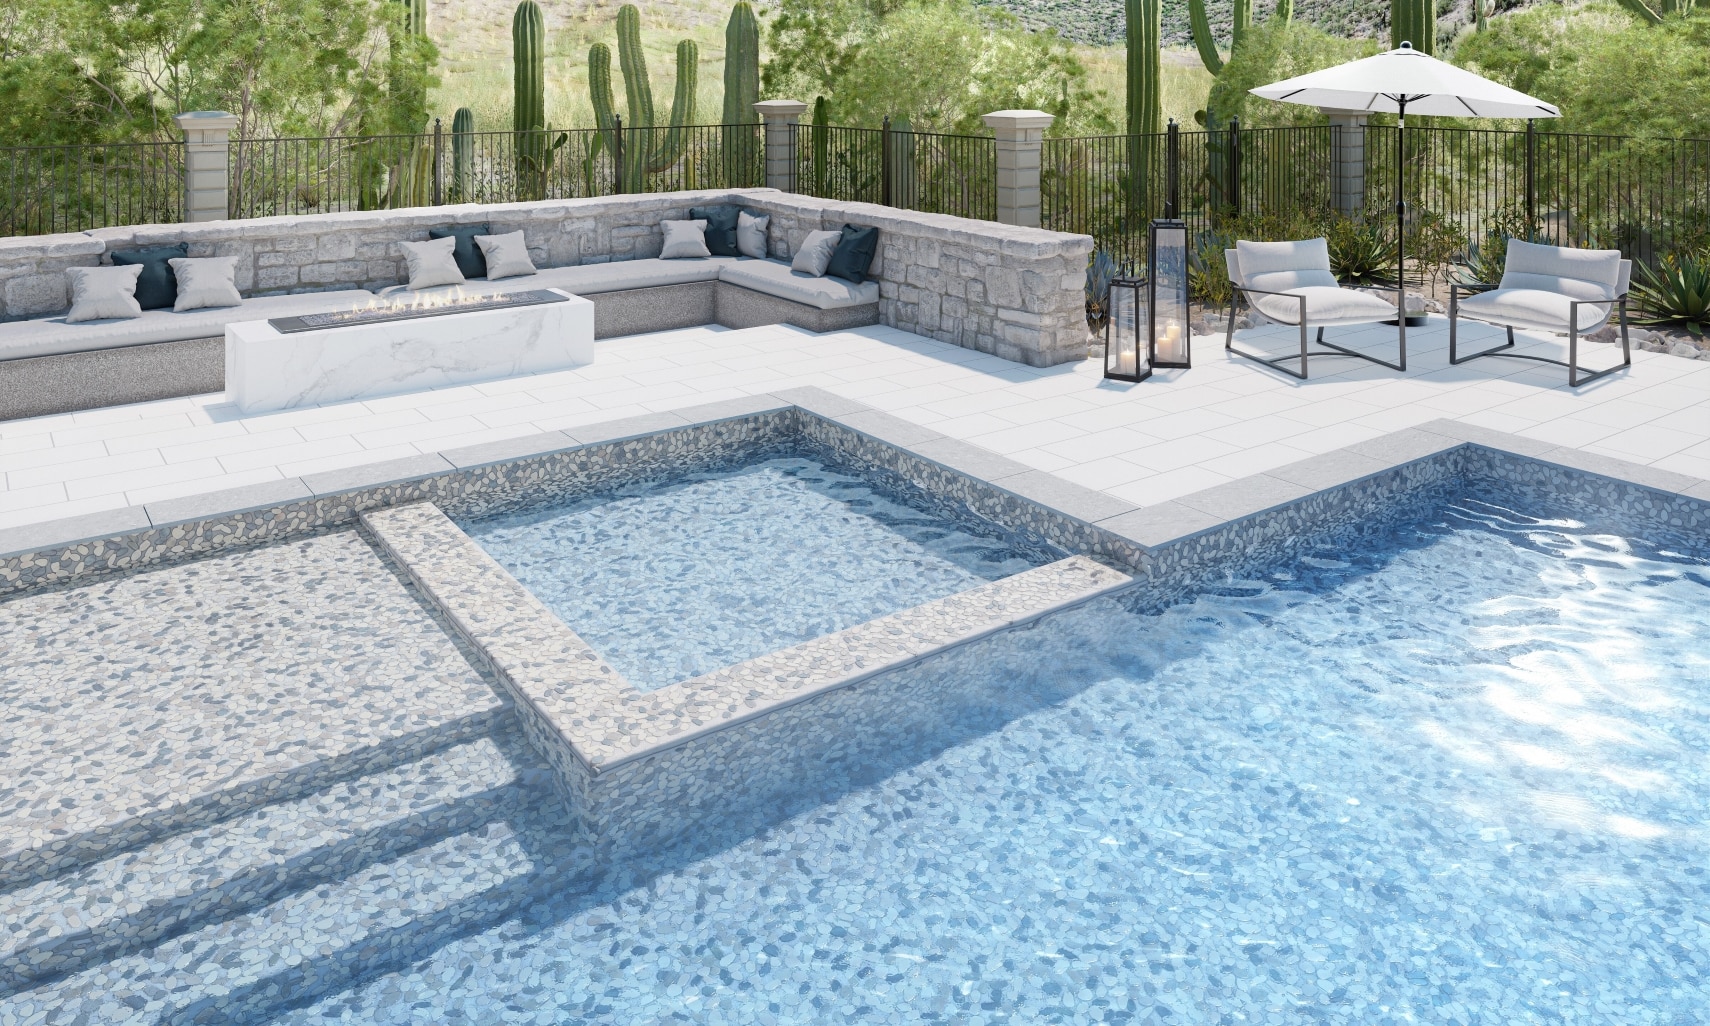 Pool and hot tub with white and gray pebble mosaic pool tile and gray tile border, pool deck with white tile, firepit with marble-look porcelain slab, and outdoor couches.